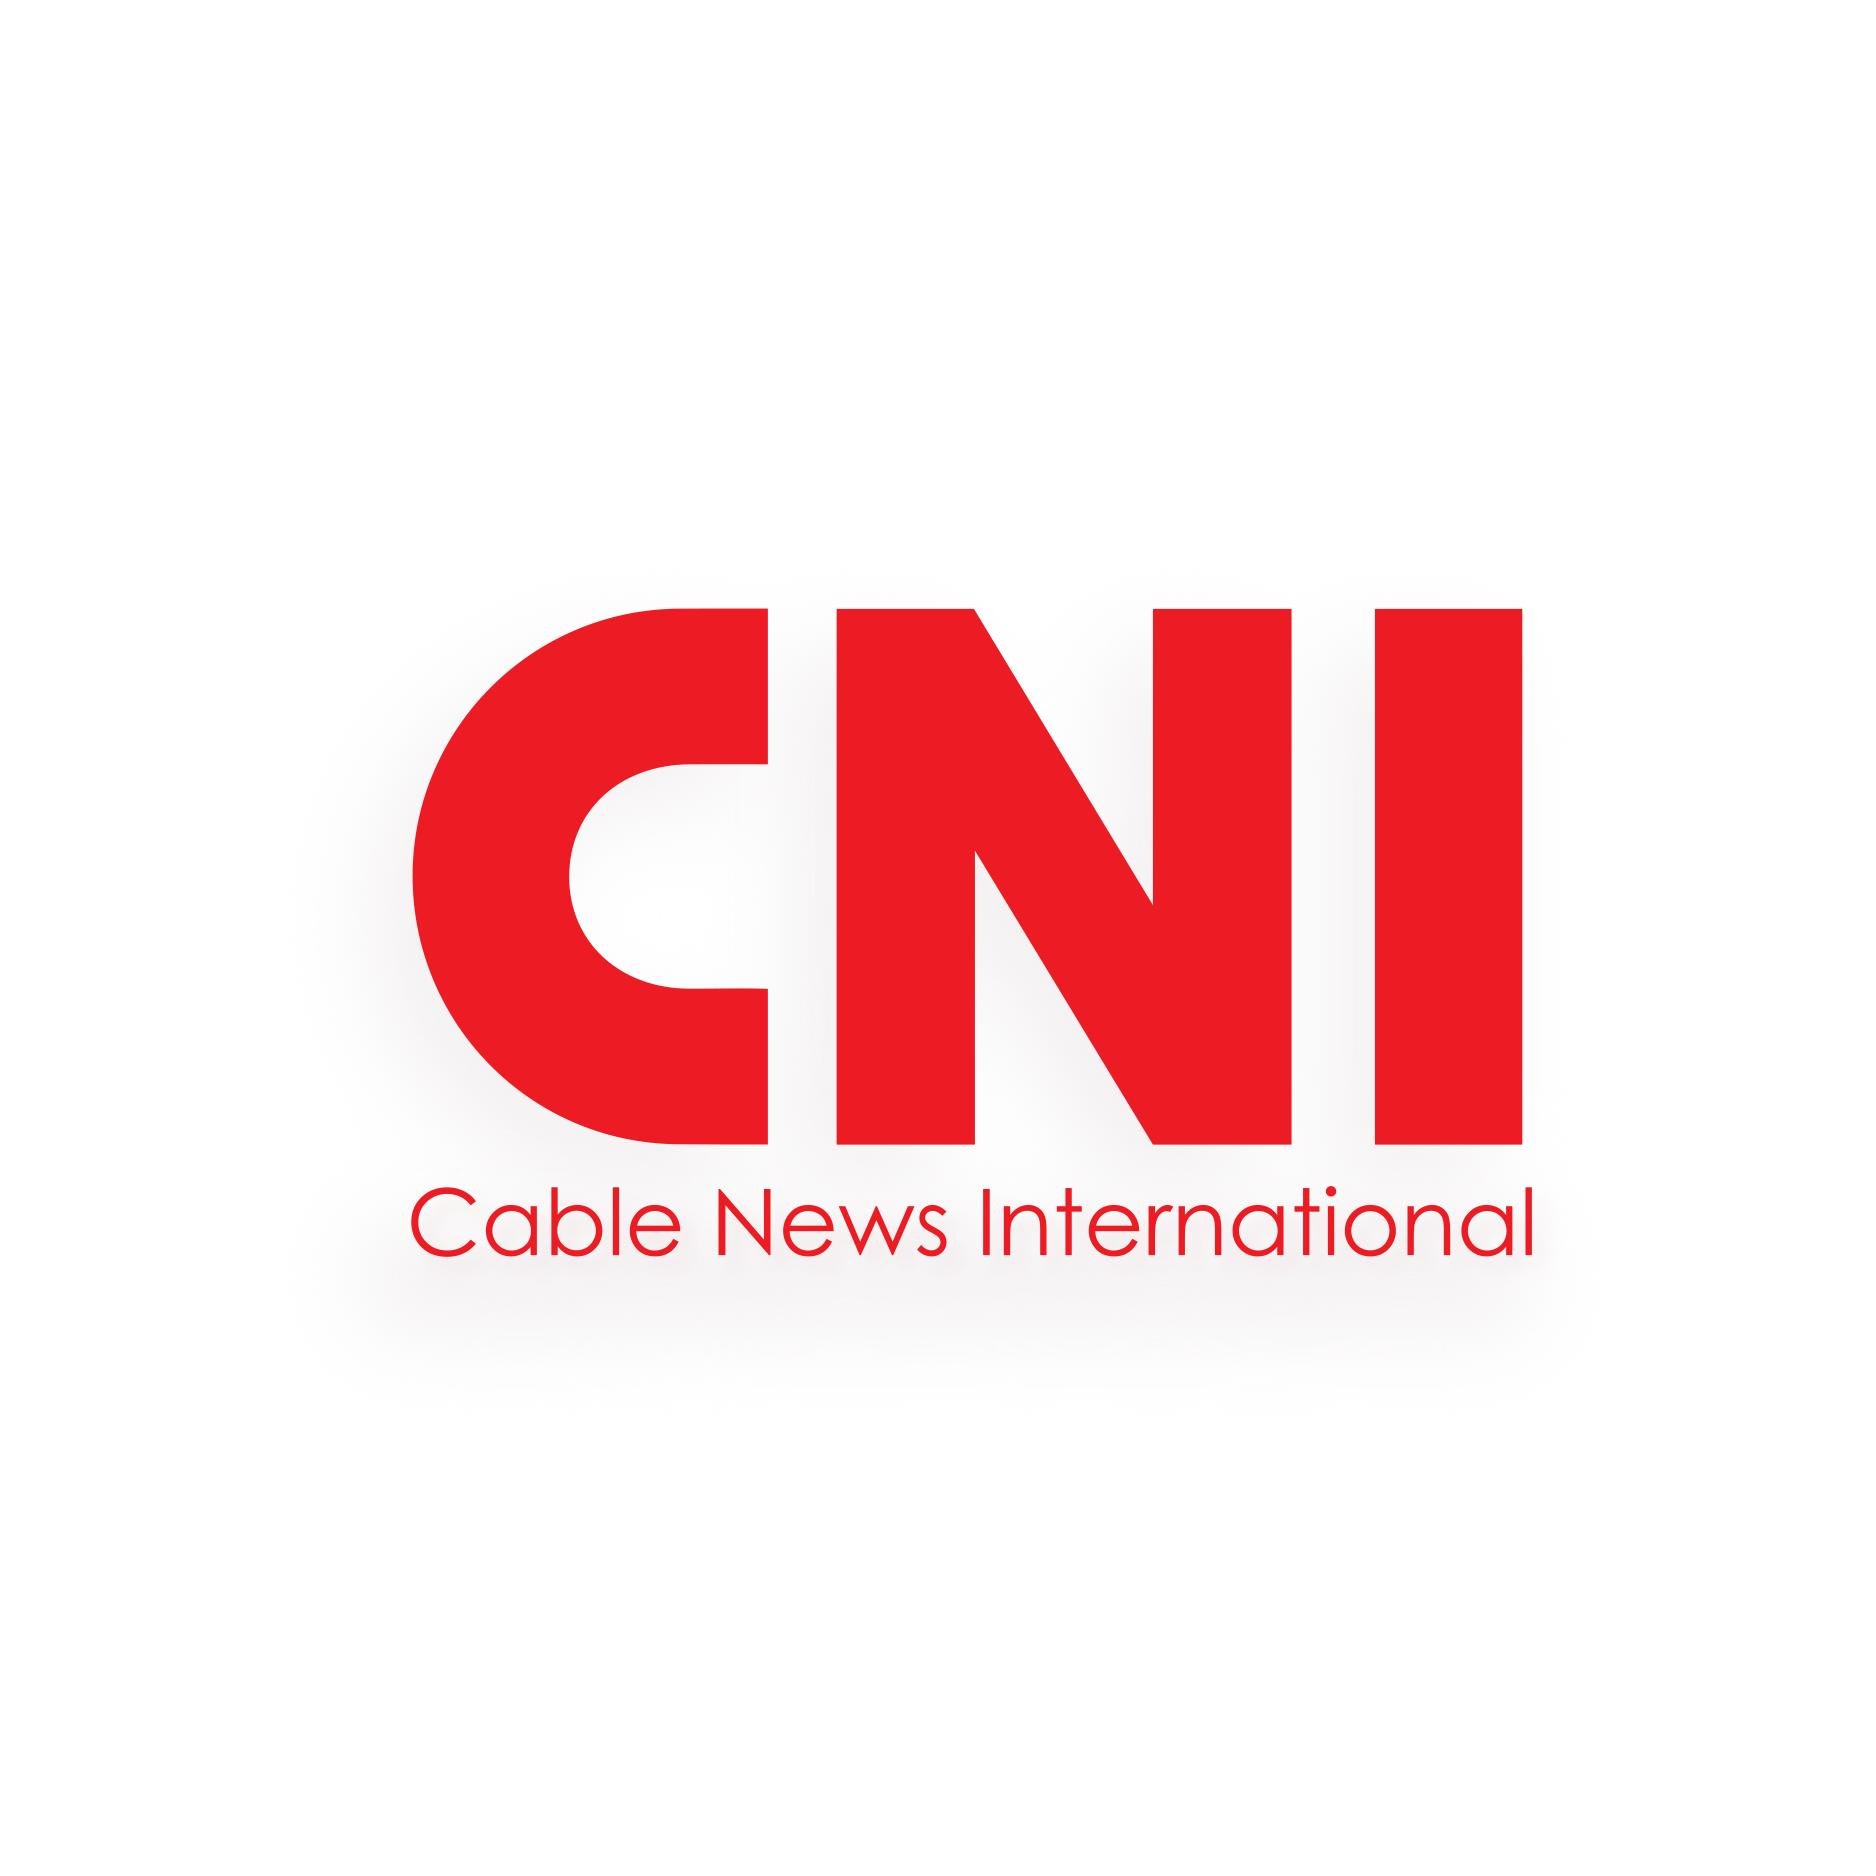 CNI is one of the most popular international news agency and newspaper.
@News
@CNI 
@DailyNews
@Bangladesh